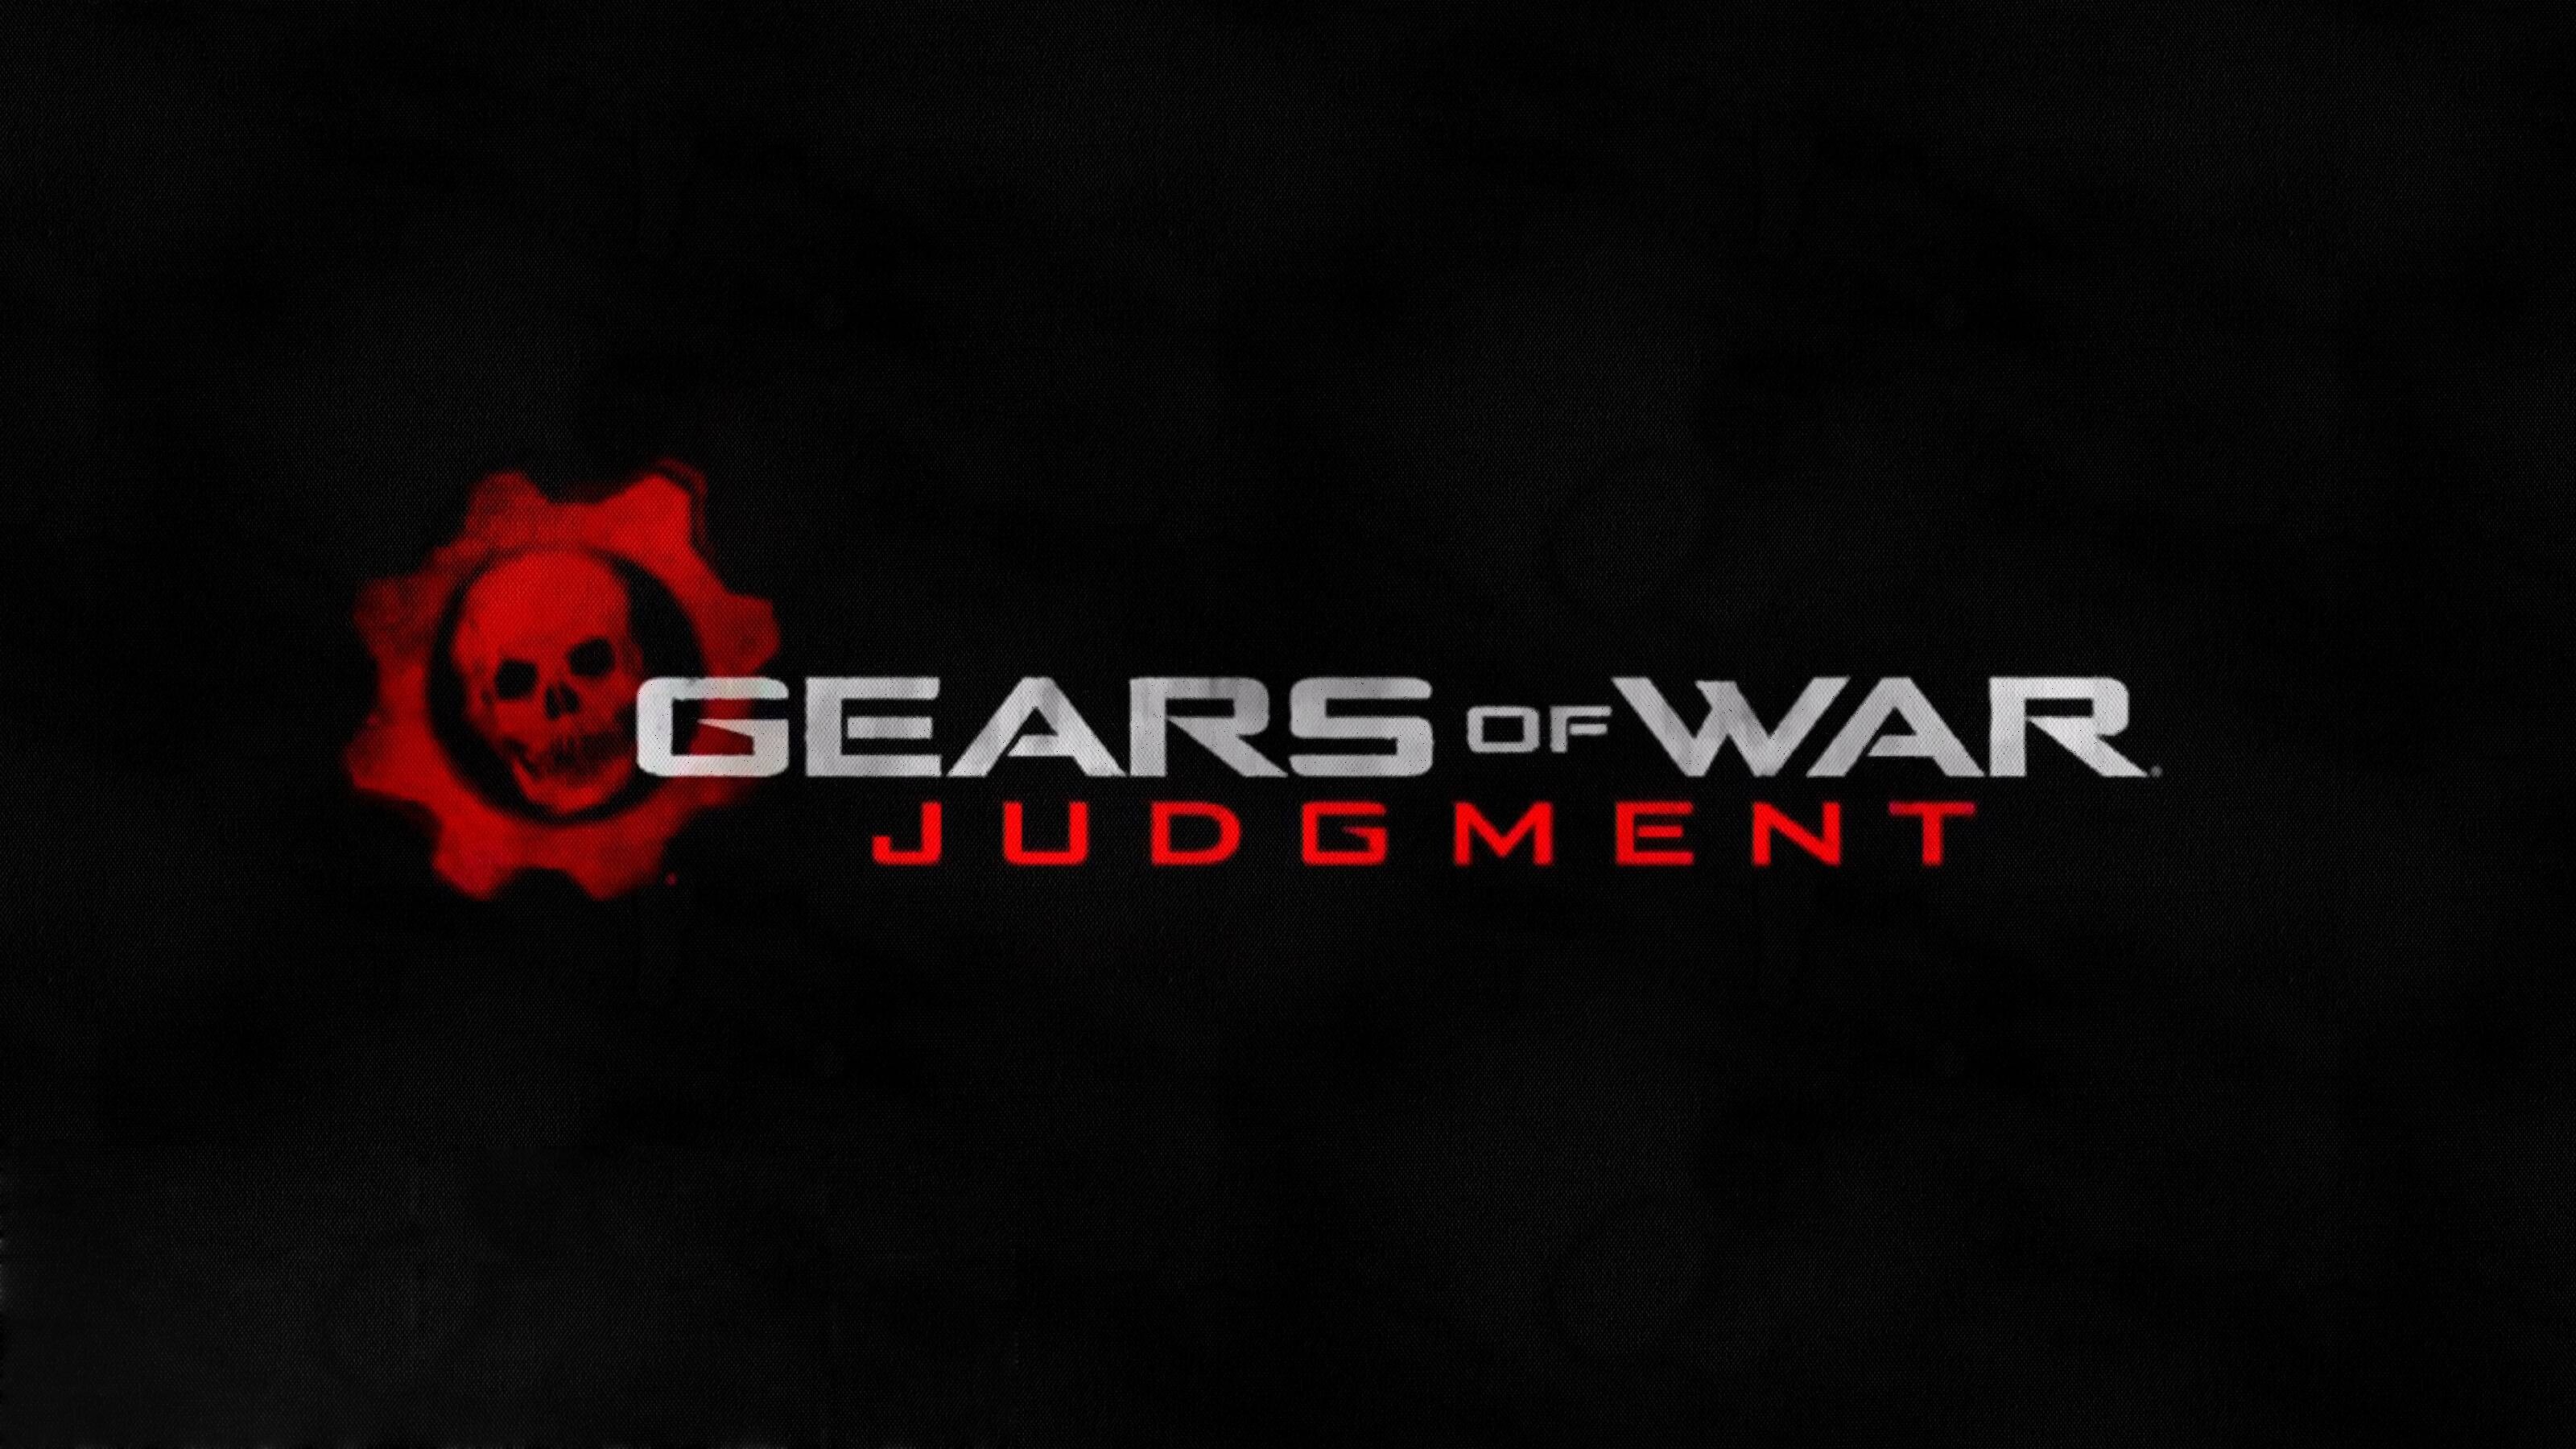 Gears of War: Judgment: A third-person shooter video game developed by People Can Fly and Epic Games. 3200x1800 HD Wallpaper.